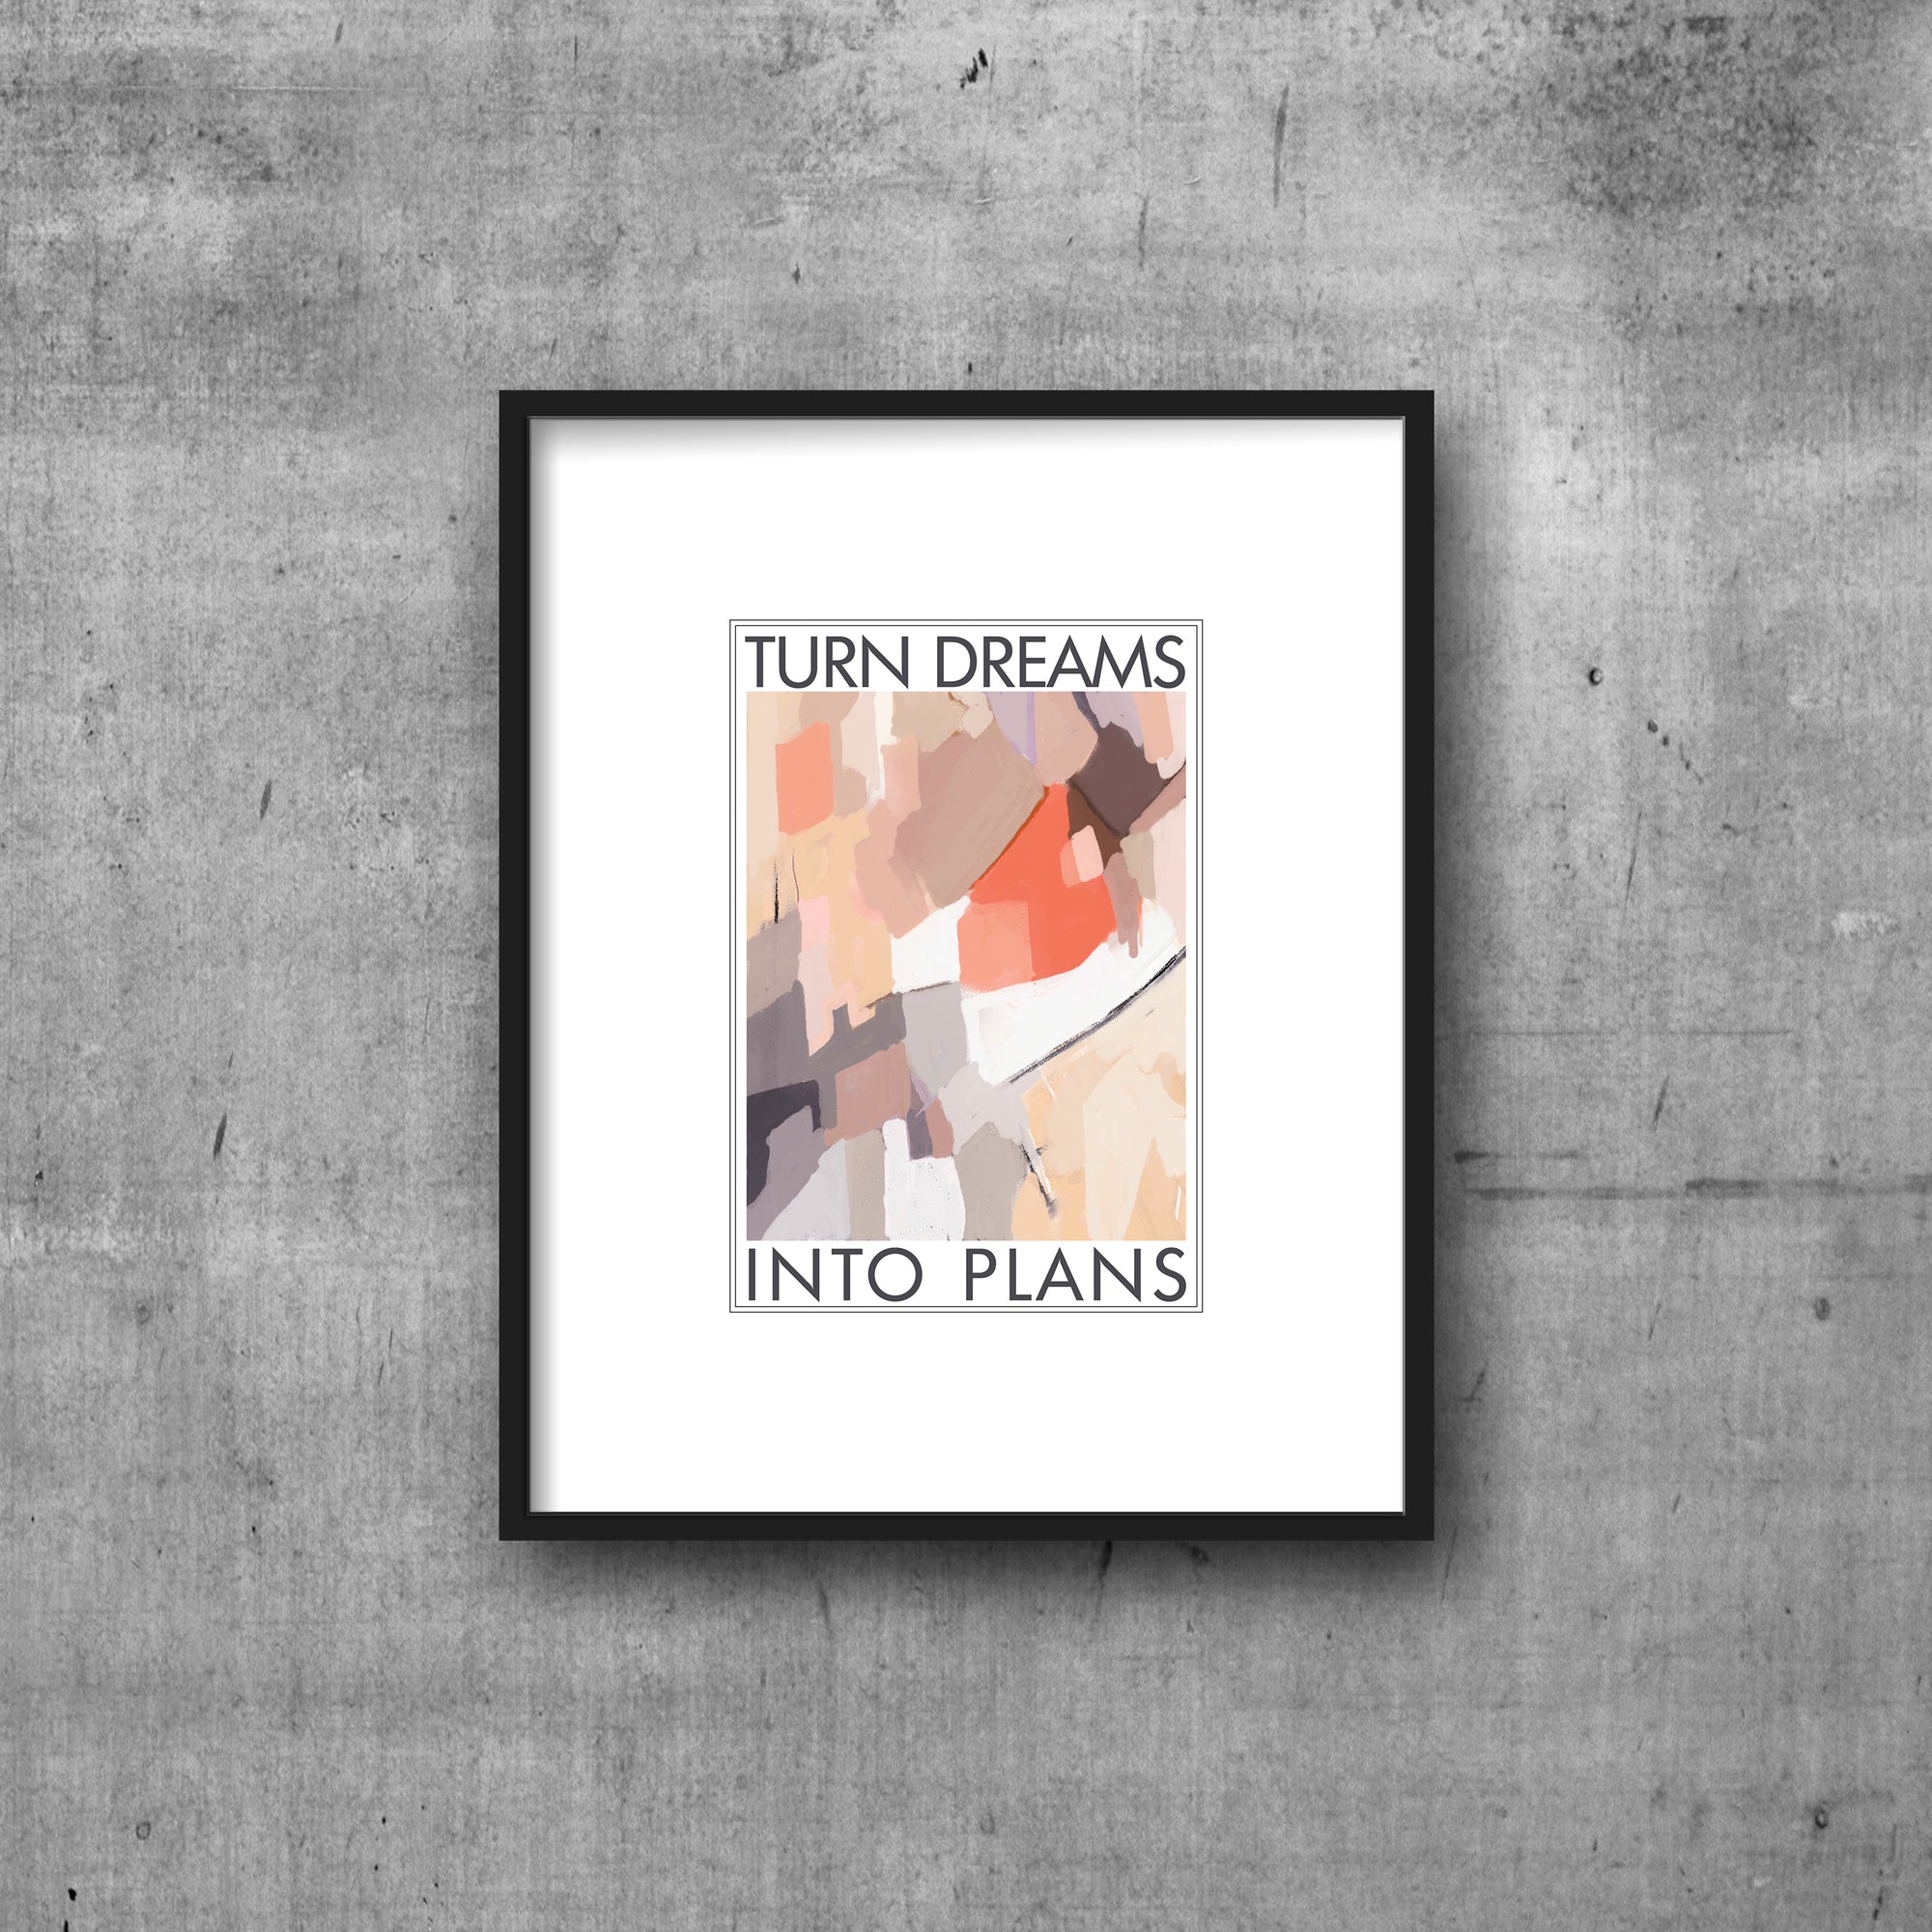 Art print with white border framing the text TURN DREAMS INTO PLANS and abstract art in shades of coral, tan lilac and mauve. Hanging by clips.